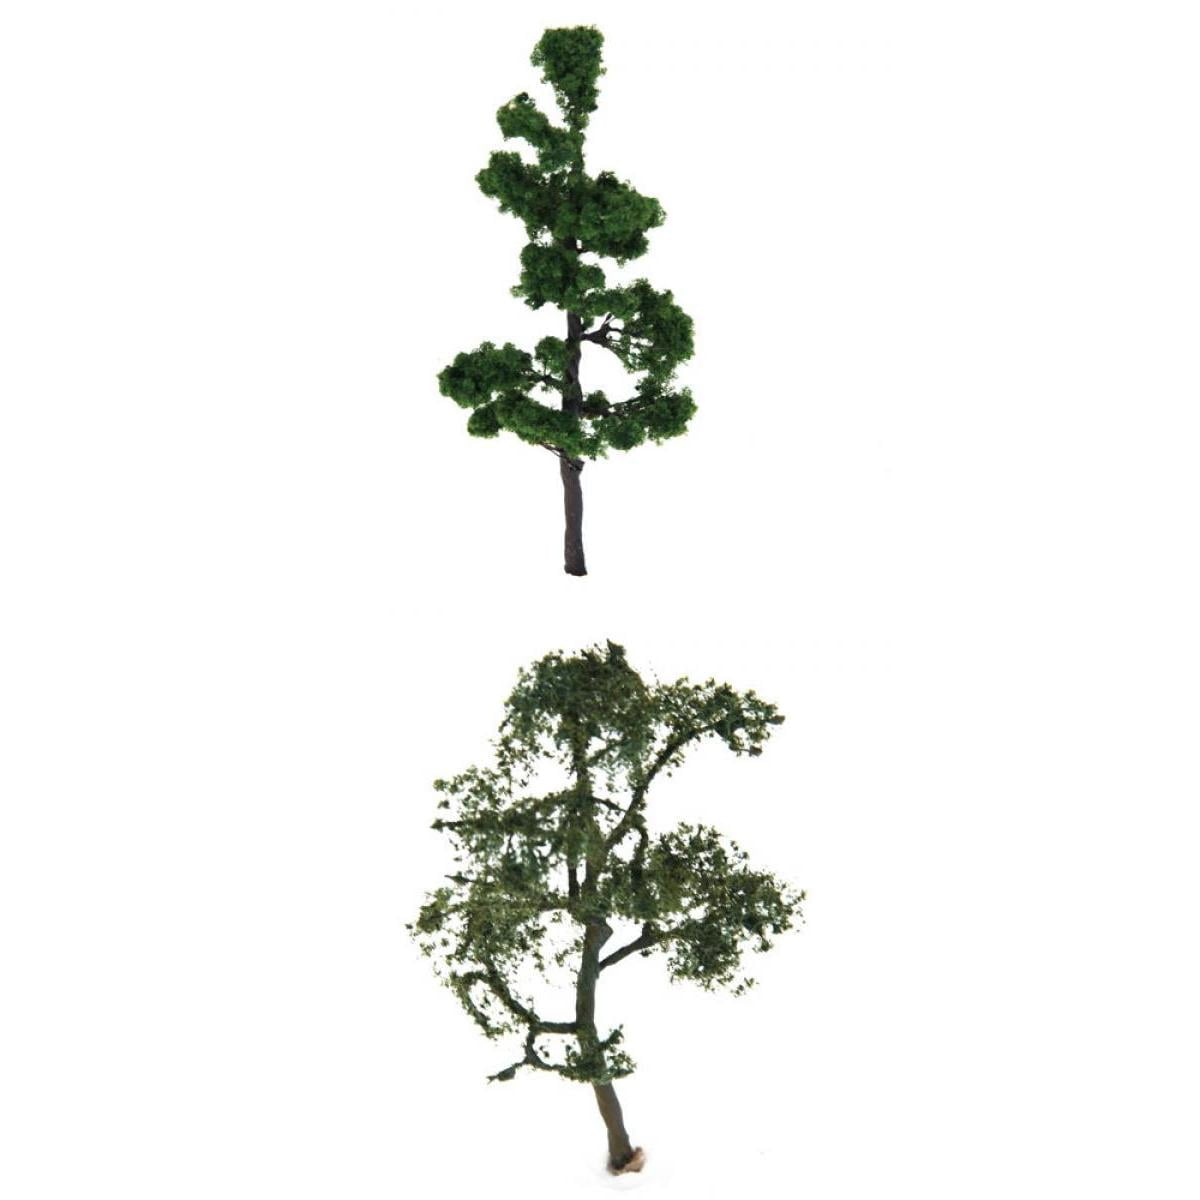 2pcs Scenery Landscape Model Tree Mountain Pine &Sycamore for DIY Scenery 